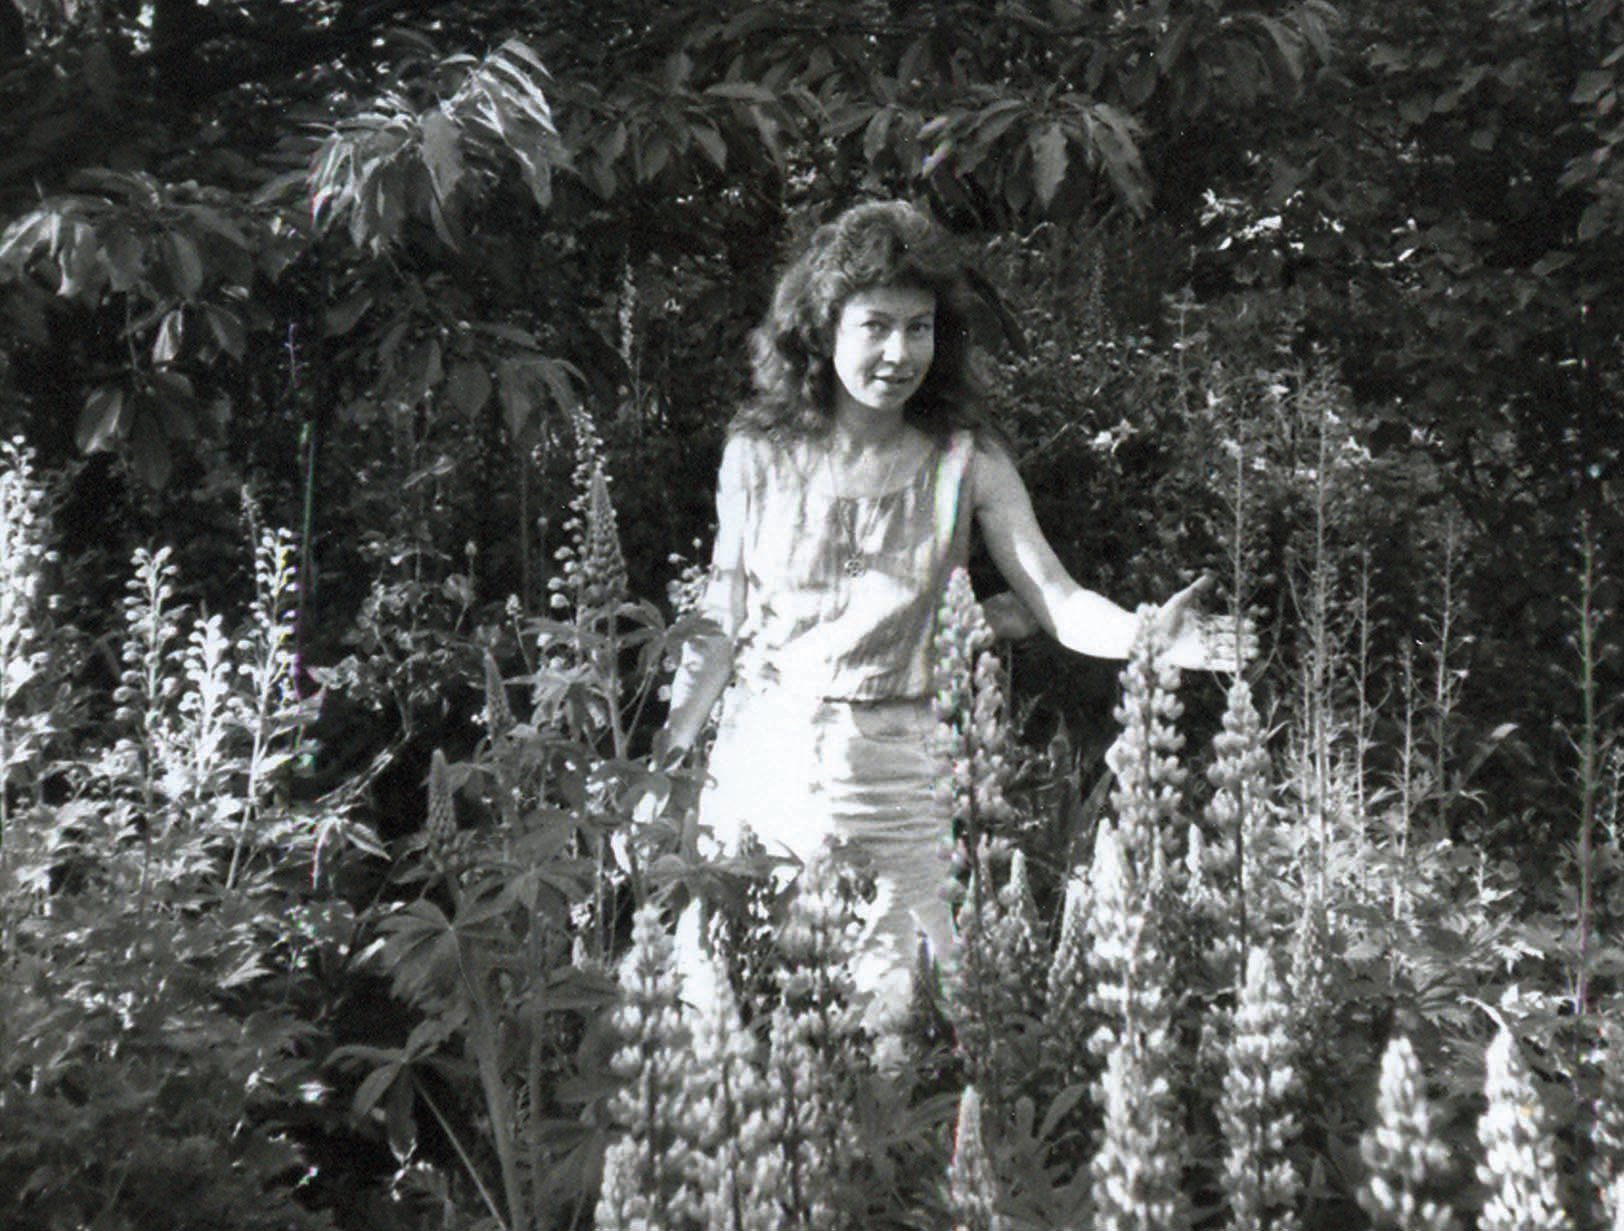 Mountain Rose Herbs' founder and owner, Julie Bailey, photographed on an herbal collection hunt many years ago. Julie always strived to collect the best, sustainably grown herbs for her budding business.